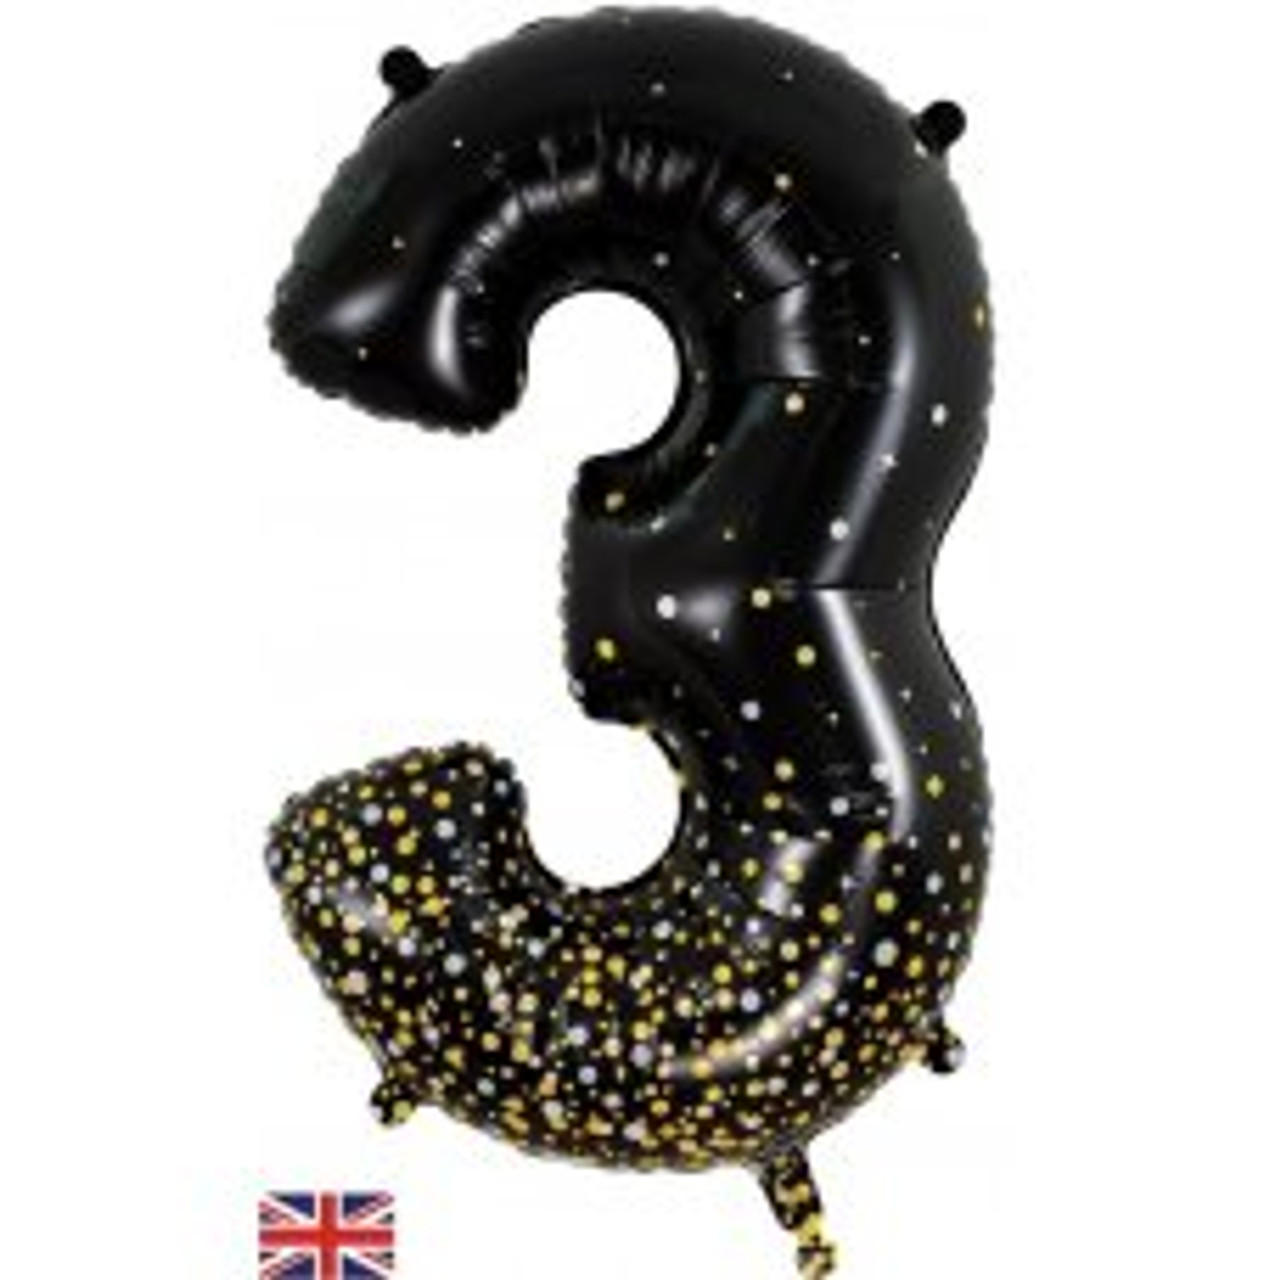 OT606933 NUMERAL SPARKLING FIZZ BLACK GOLD 3 FOIL BALLOON 87CM/34". HELIUM INFLATED, RIBBON AND WEIGHT